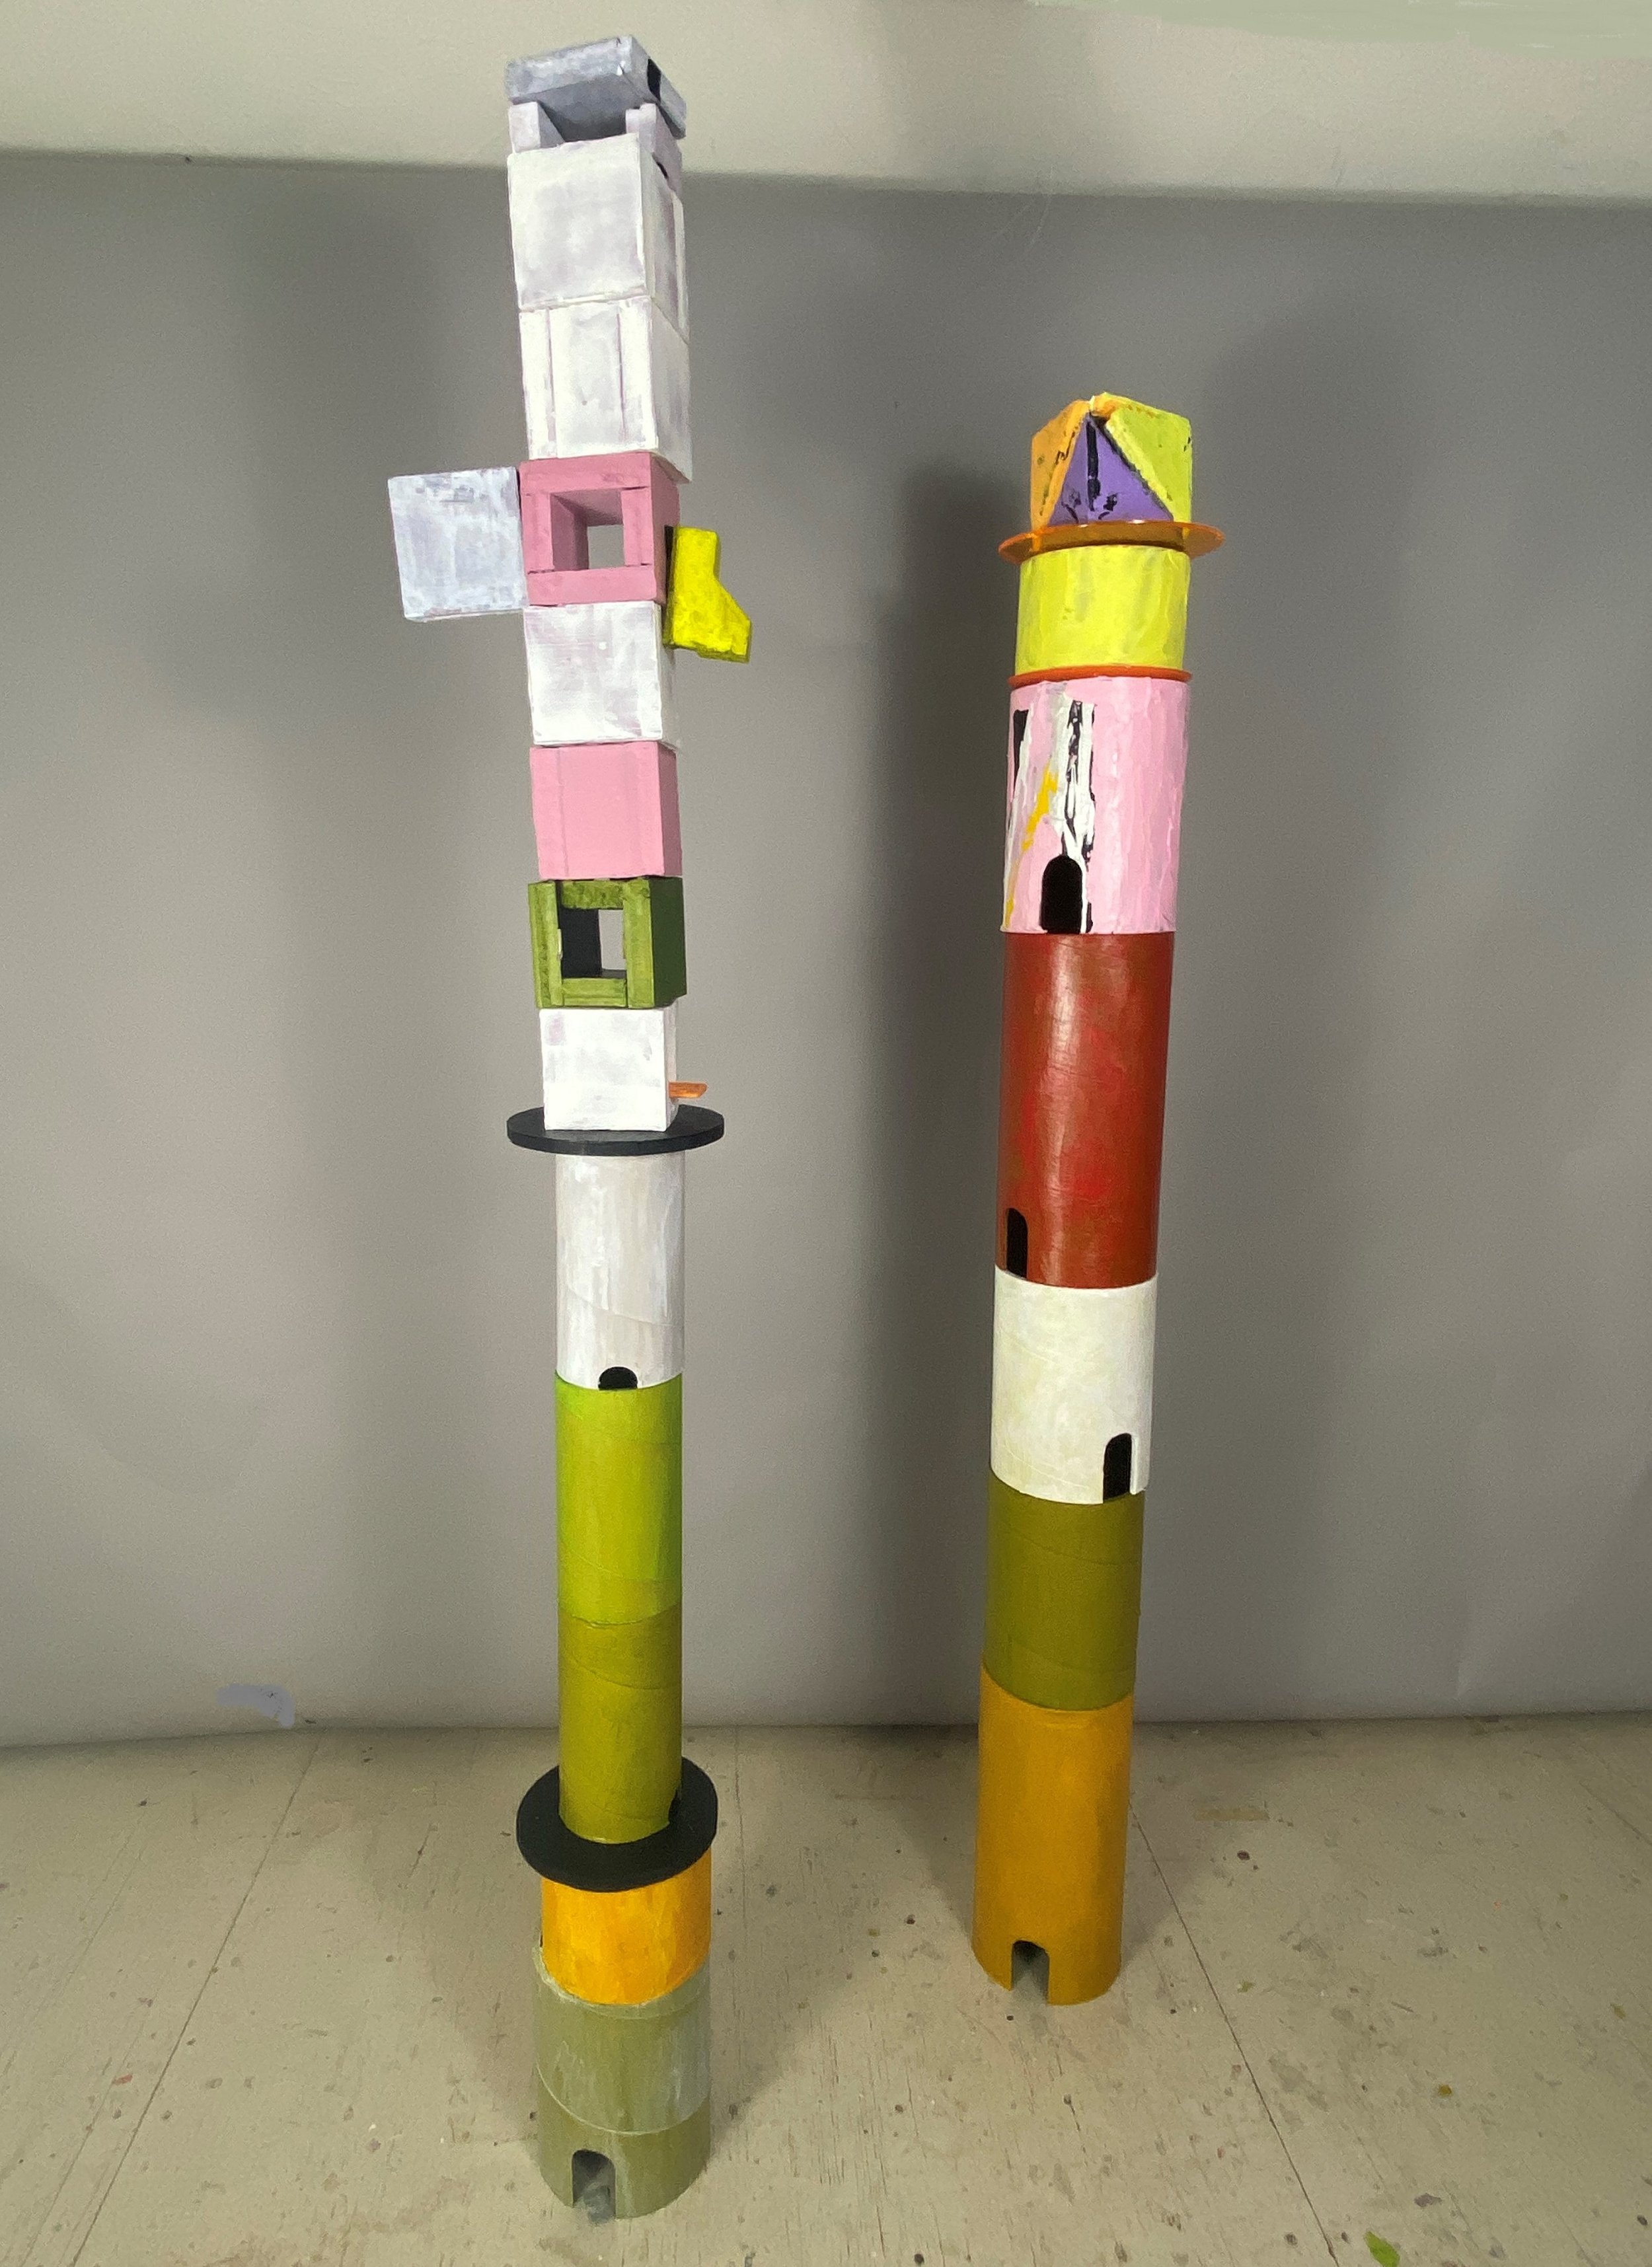    Tippy Towers    Mixed Media, 76h x 8 inches (L) and 70h  x 7 inches (R) 